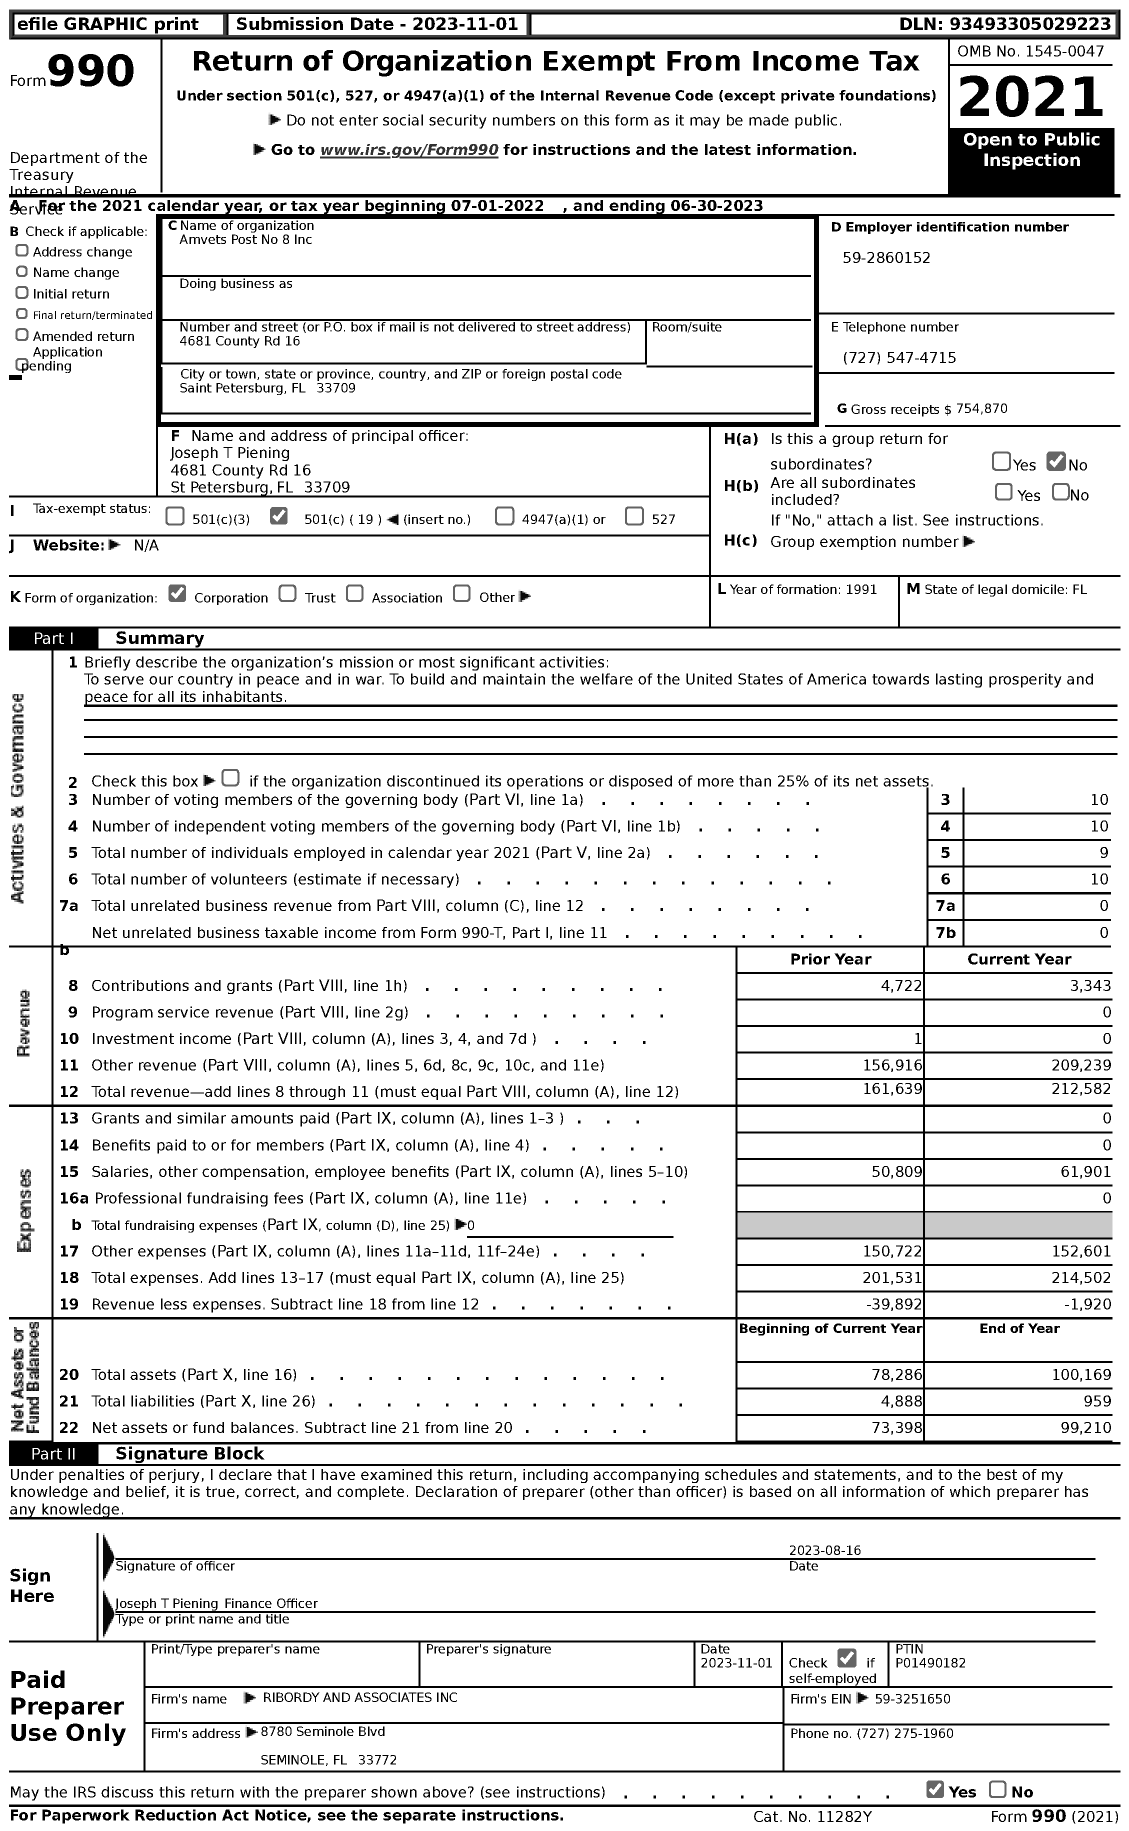 Image of first page of 2022 Form 990 for Amvets - Amvets Post No 8